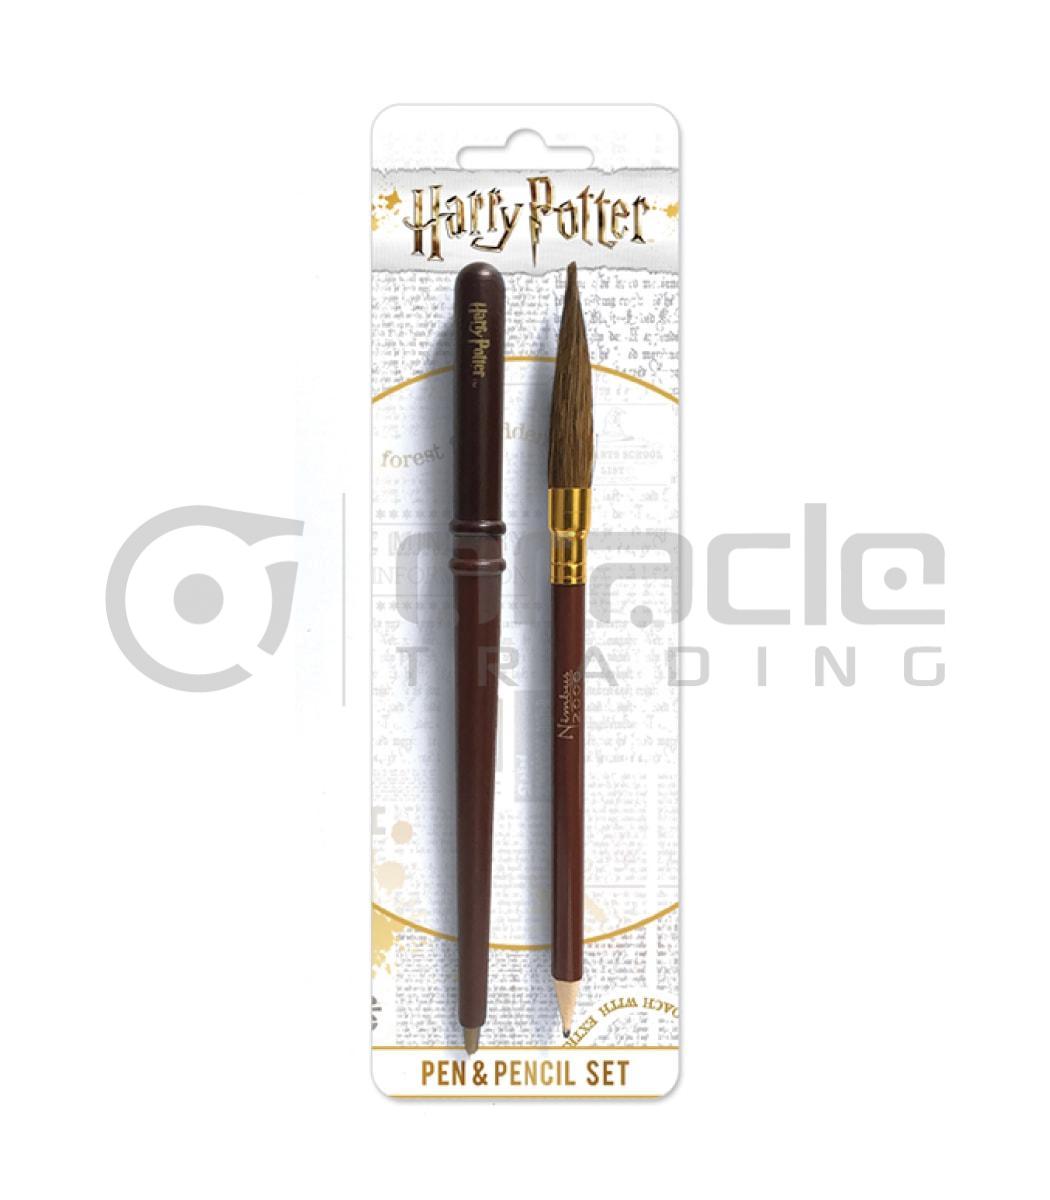 Harry Potter Pen & Pencil Set (Wand & Broom) – Oracle Trading Inc.